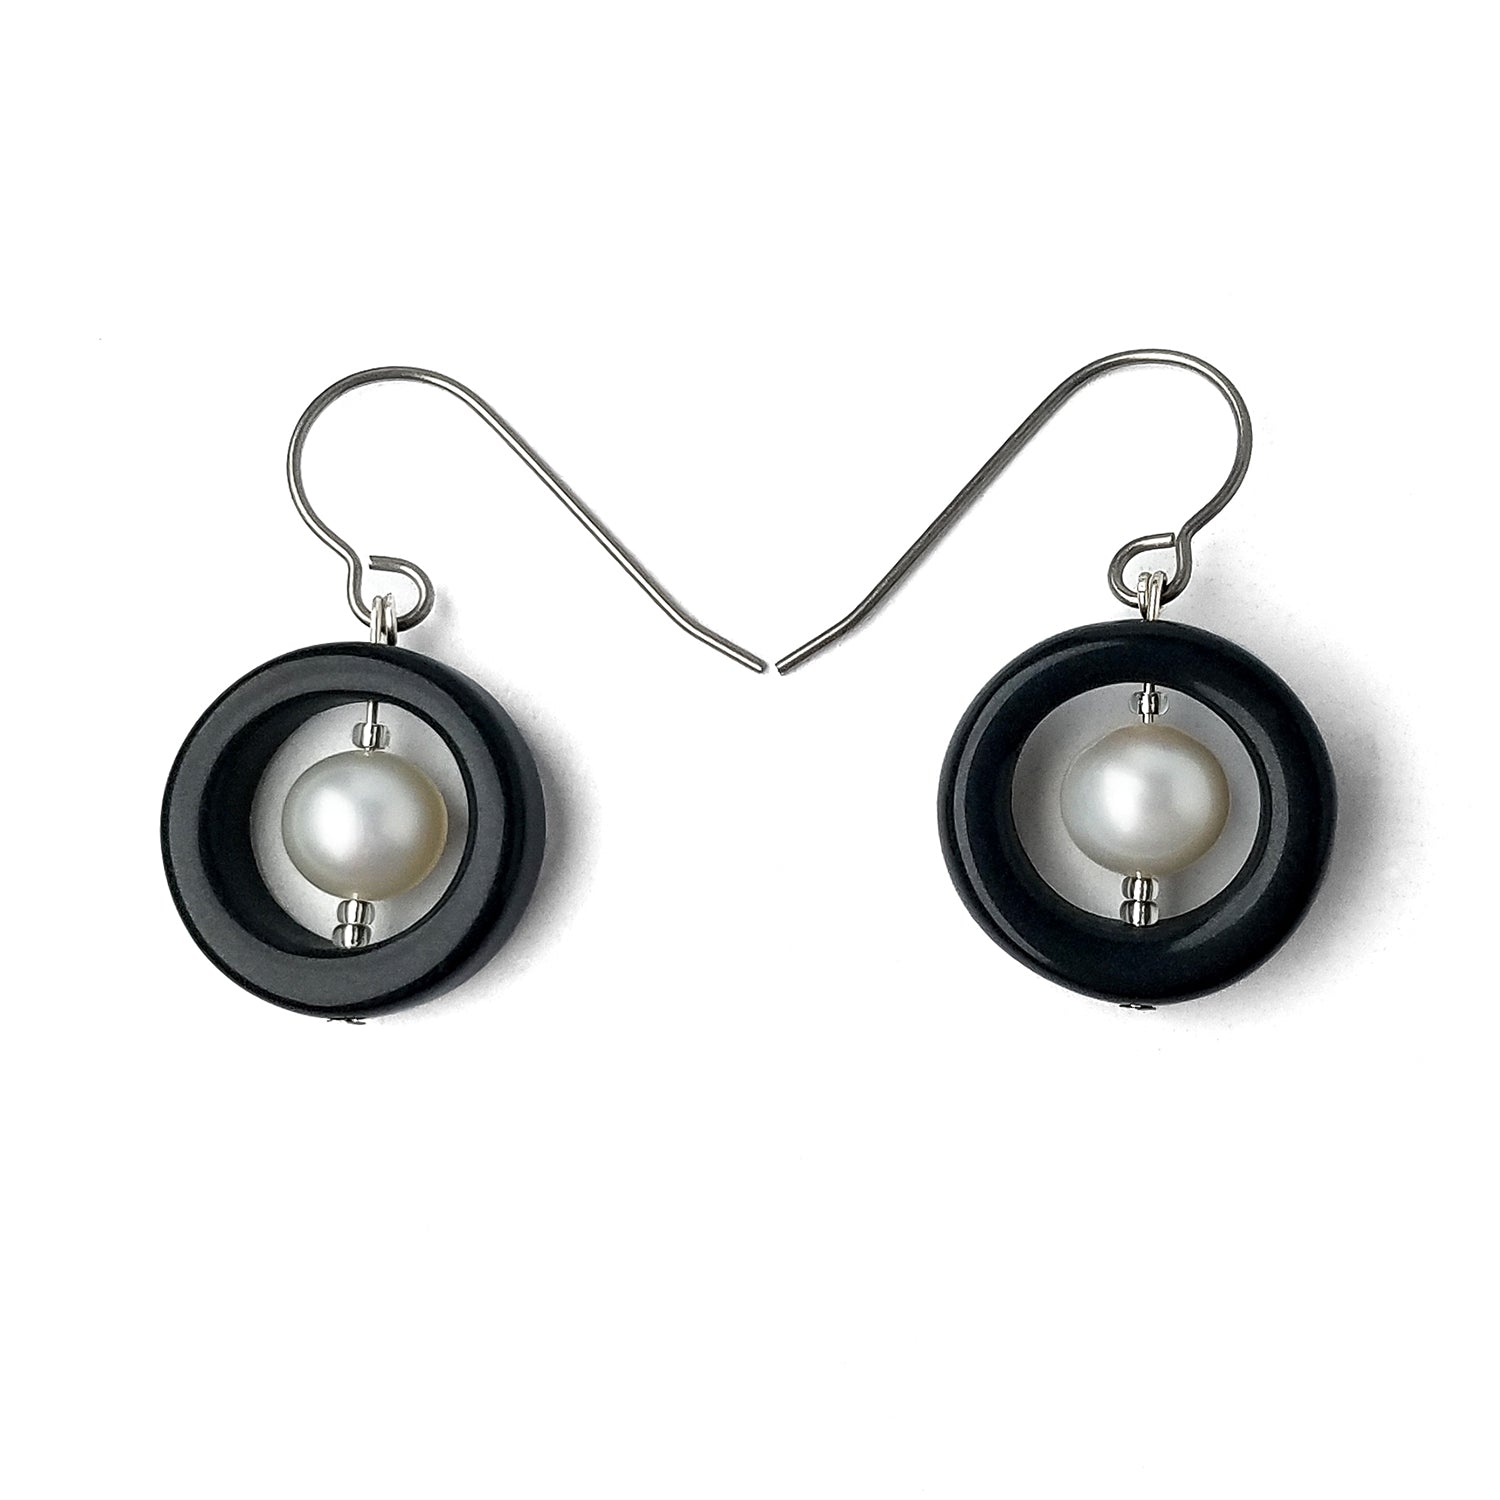 Porcelain and Pearls Earrings.  For each earring, a ring of rich black  porcelain frames a cultured freshwater pearl and is suspended from titanium hooks.  Earrings are displayed on a white background.